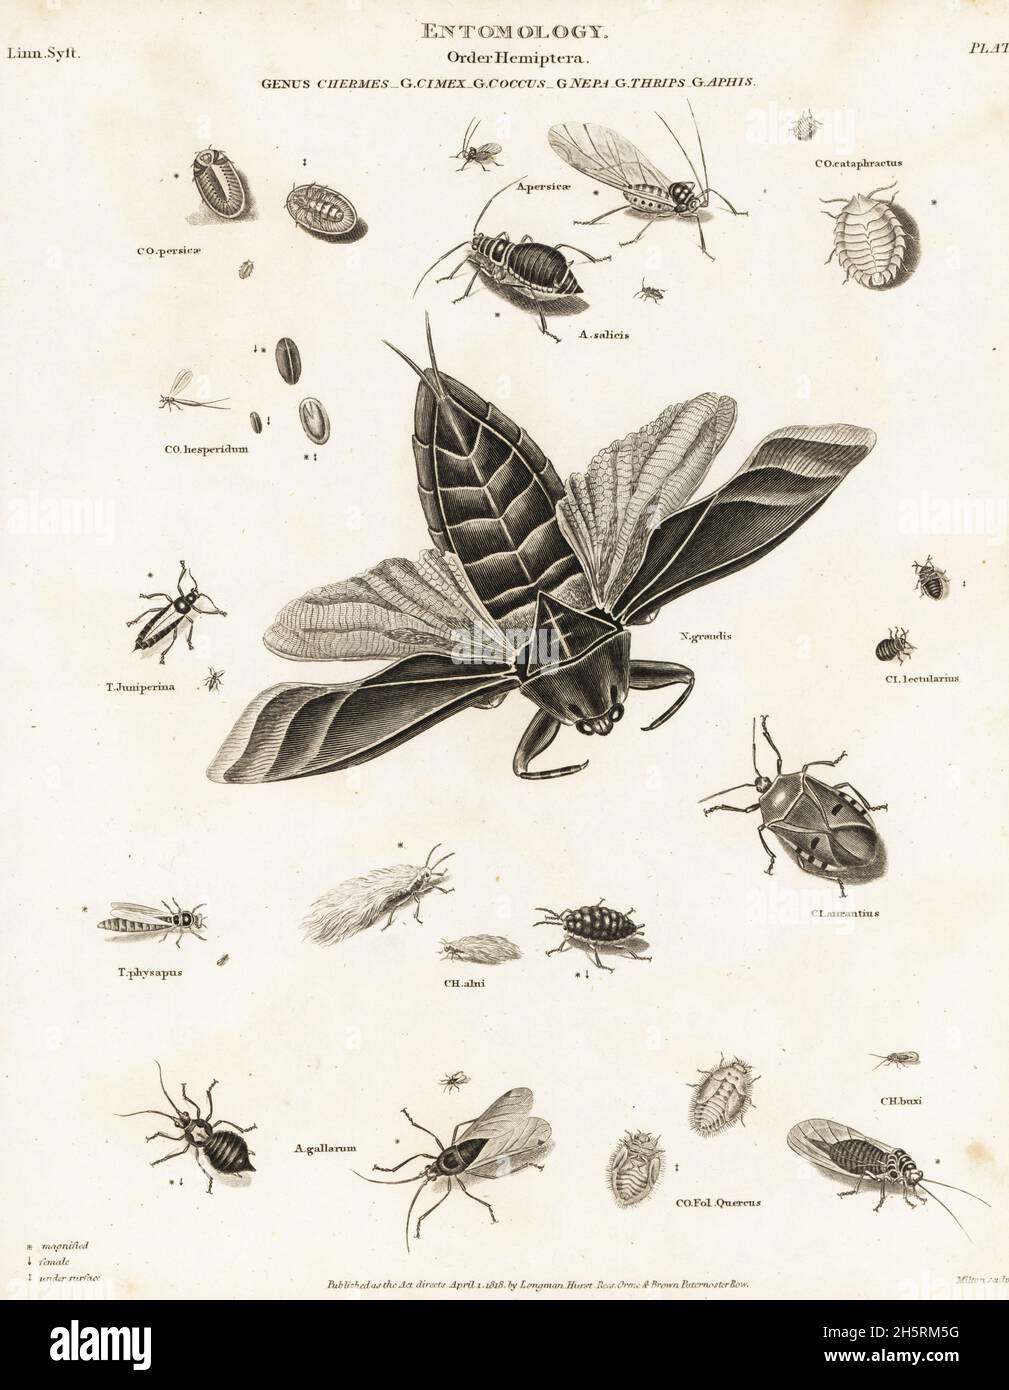 Water scorpion, Nepa grandis, aphid, Pterocomma salicis, scale insect, Kermes quercus, woolly aphid, Psylla buxi, Psylla alni, soft scale insect, Coccus hesperidum, bedbug, Cimex lectularius, etc. Copperplate engraving by Milton from Abraham Rees' Cyclopedia or Universal Dictionary of Arts, Sciences and Literature, Longman, Hurst, Rees, Orme and Brown, London, 1818. Stock Photo